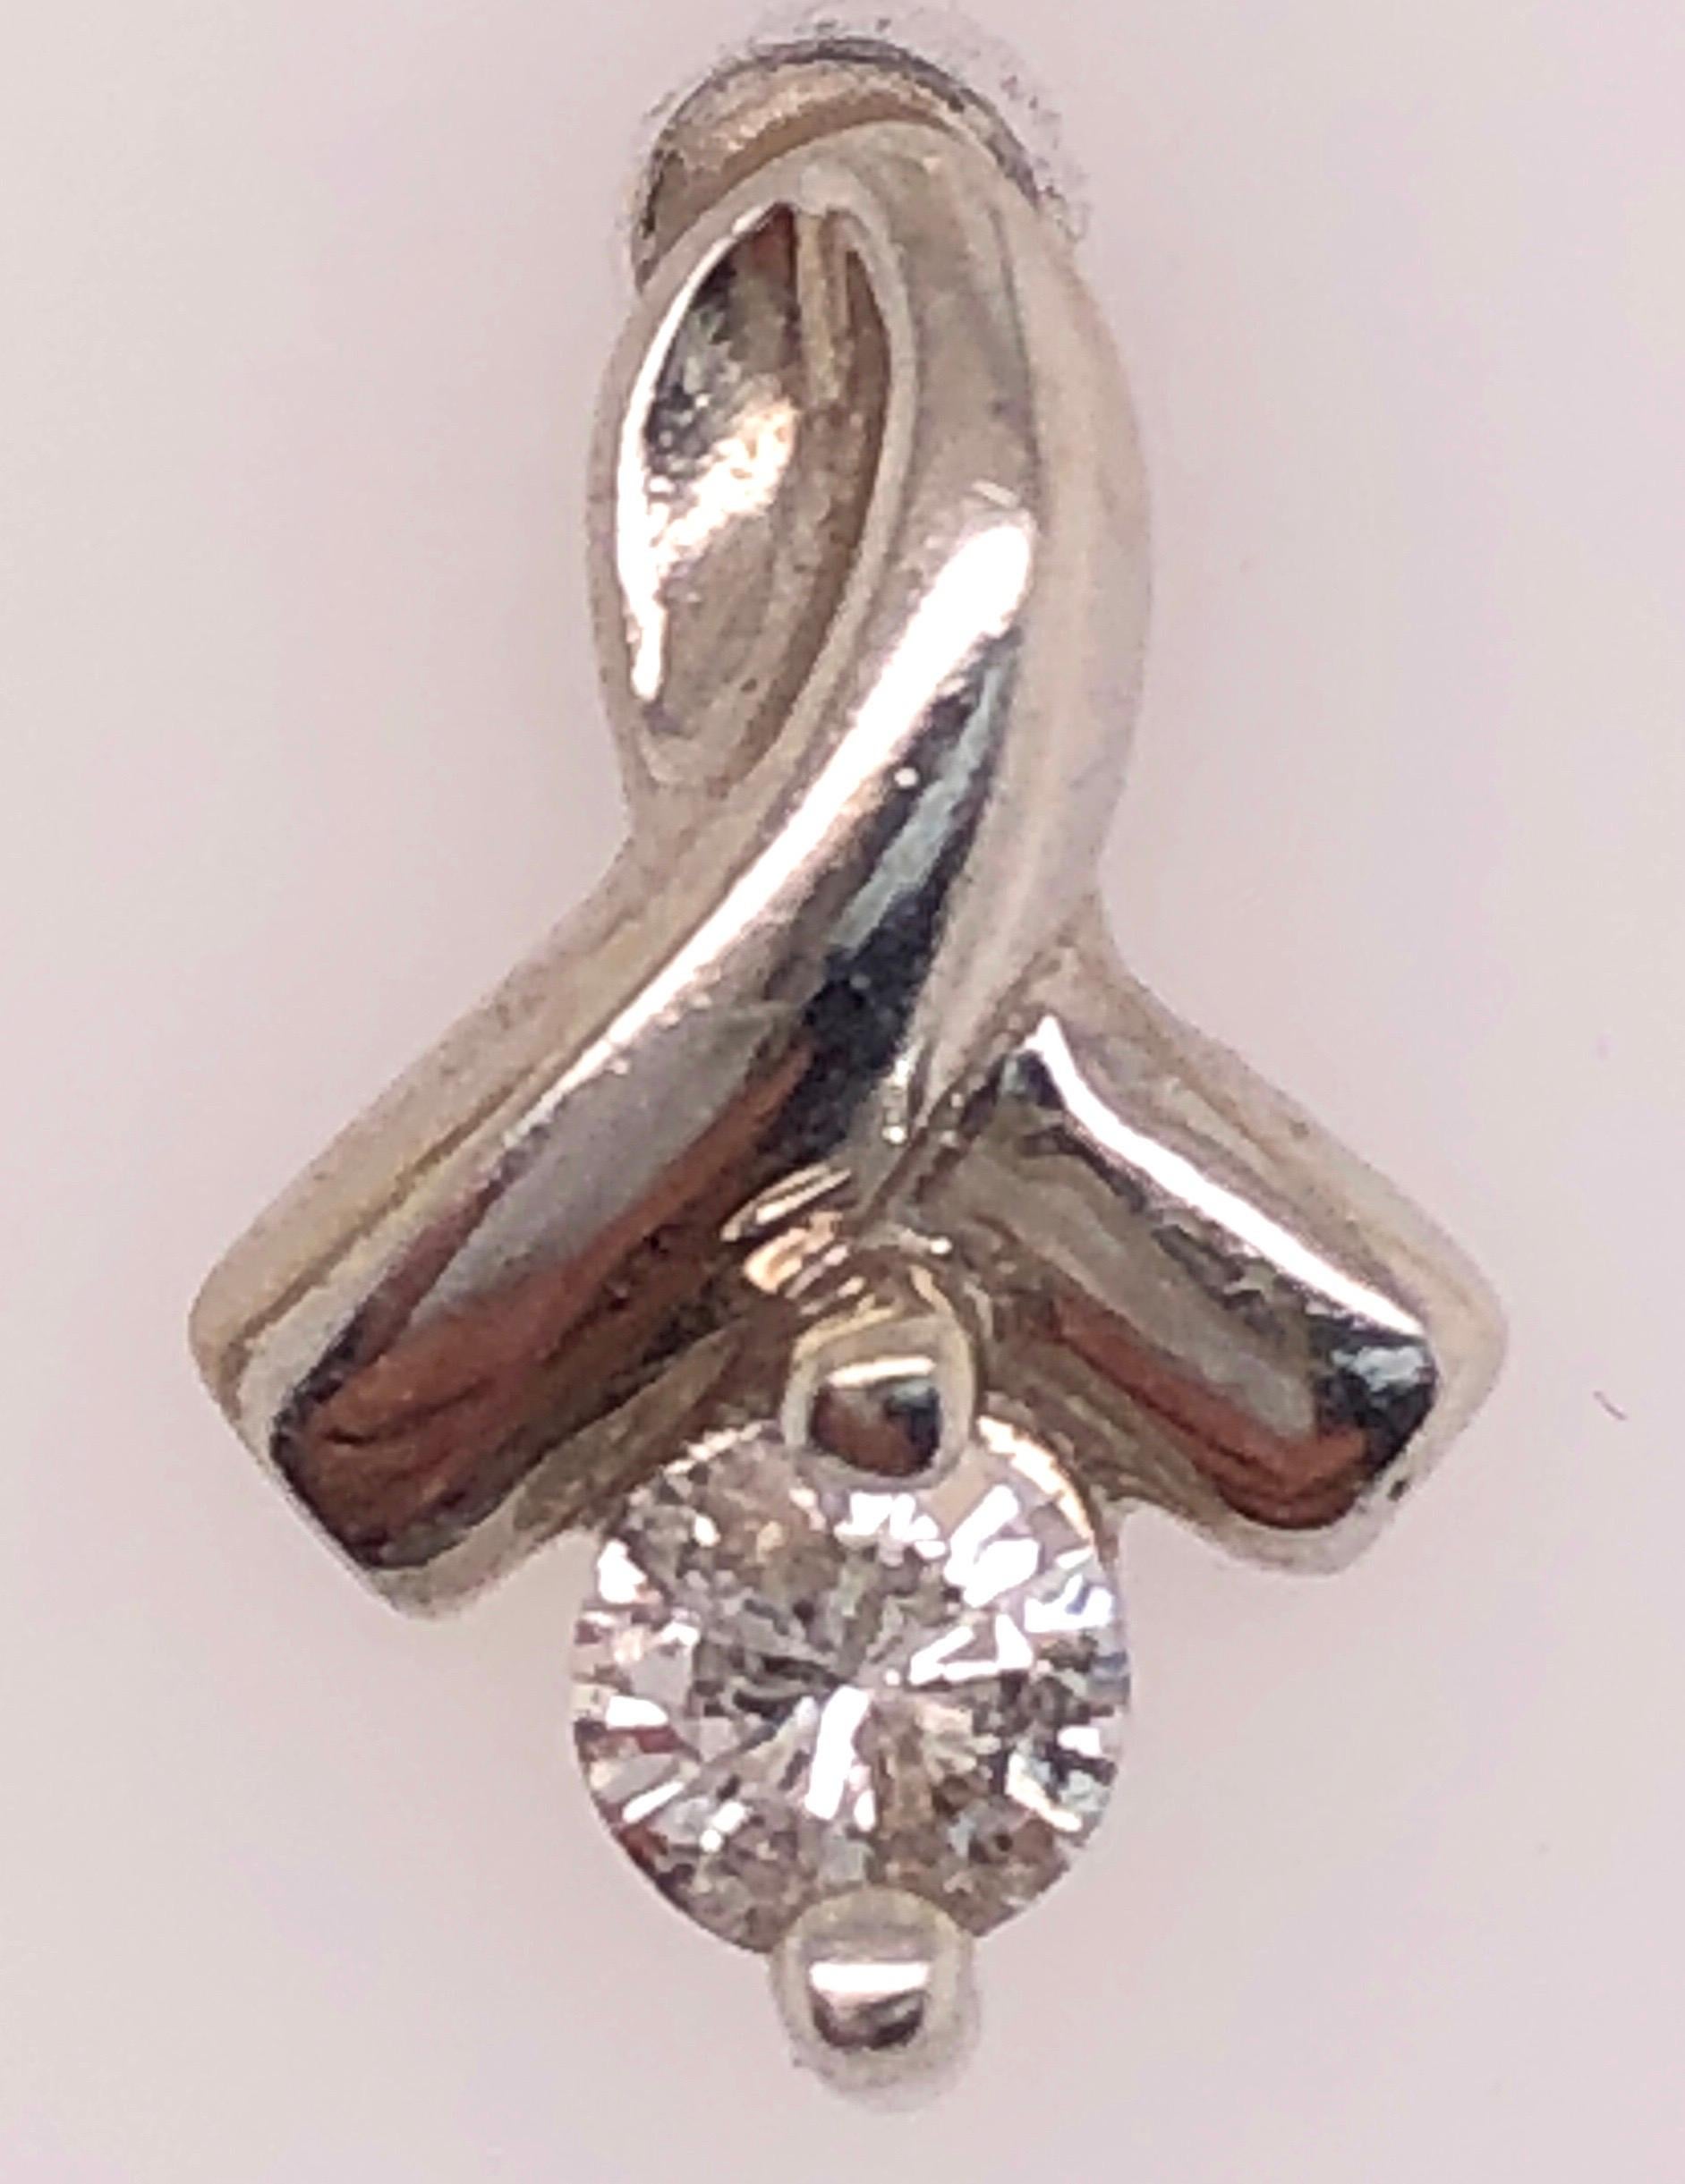 14 Kt White Gold And Diamond Drop Earrings 0.30 Total Diamond Weight
2 grams total weight.

note; pls. change the tag to 241